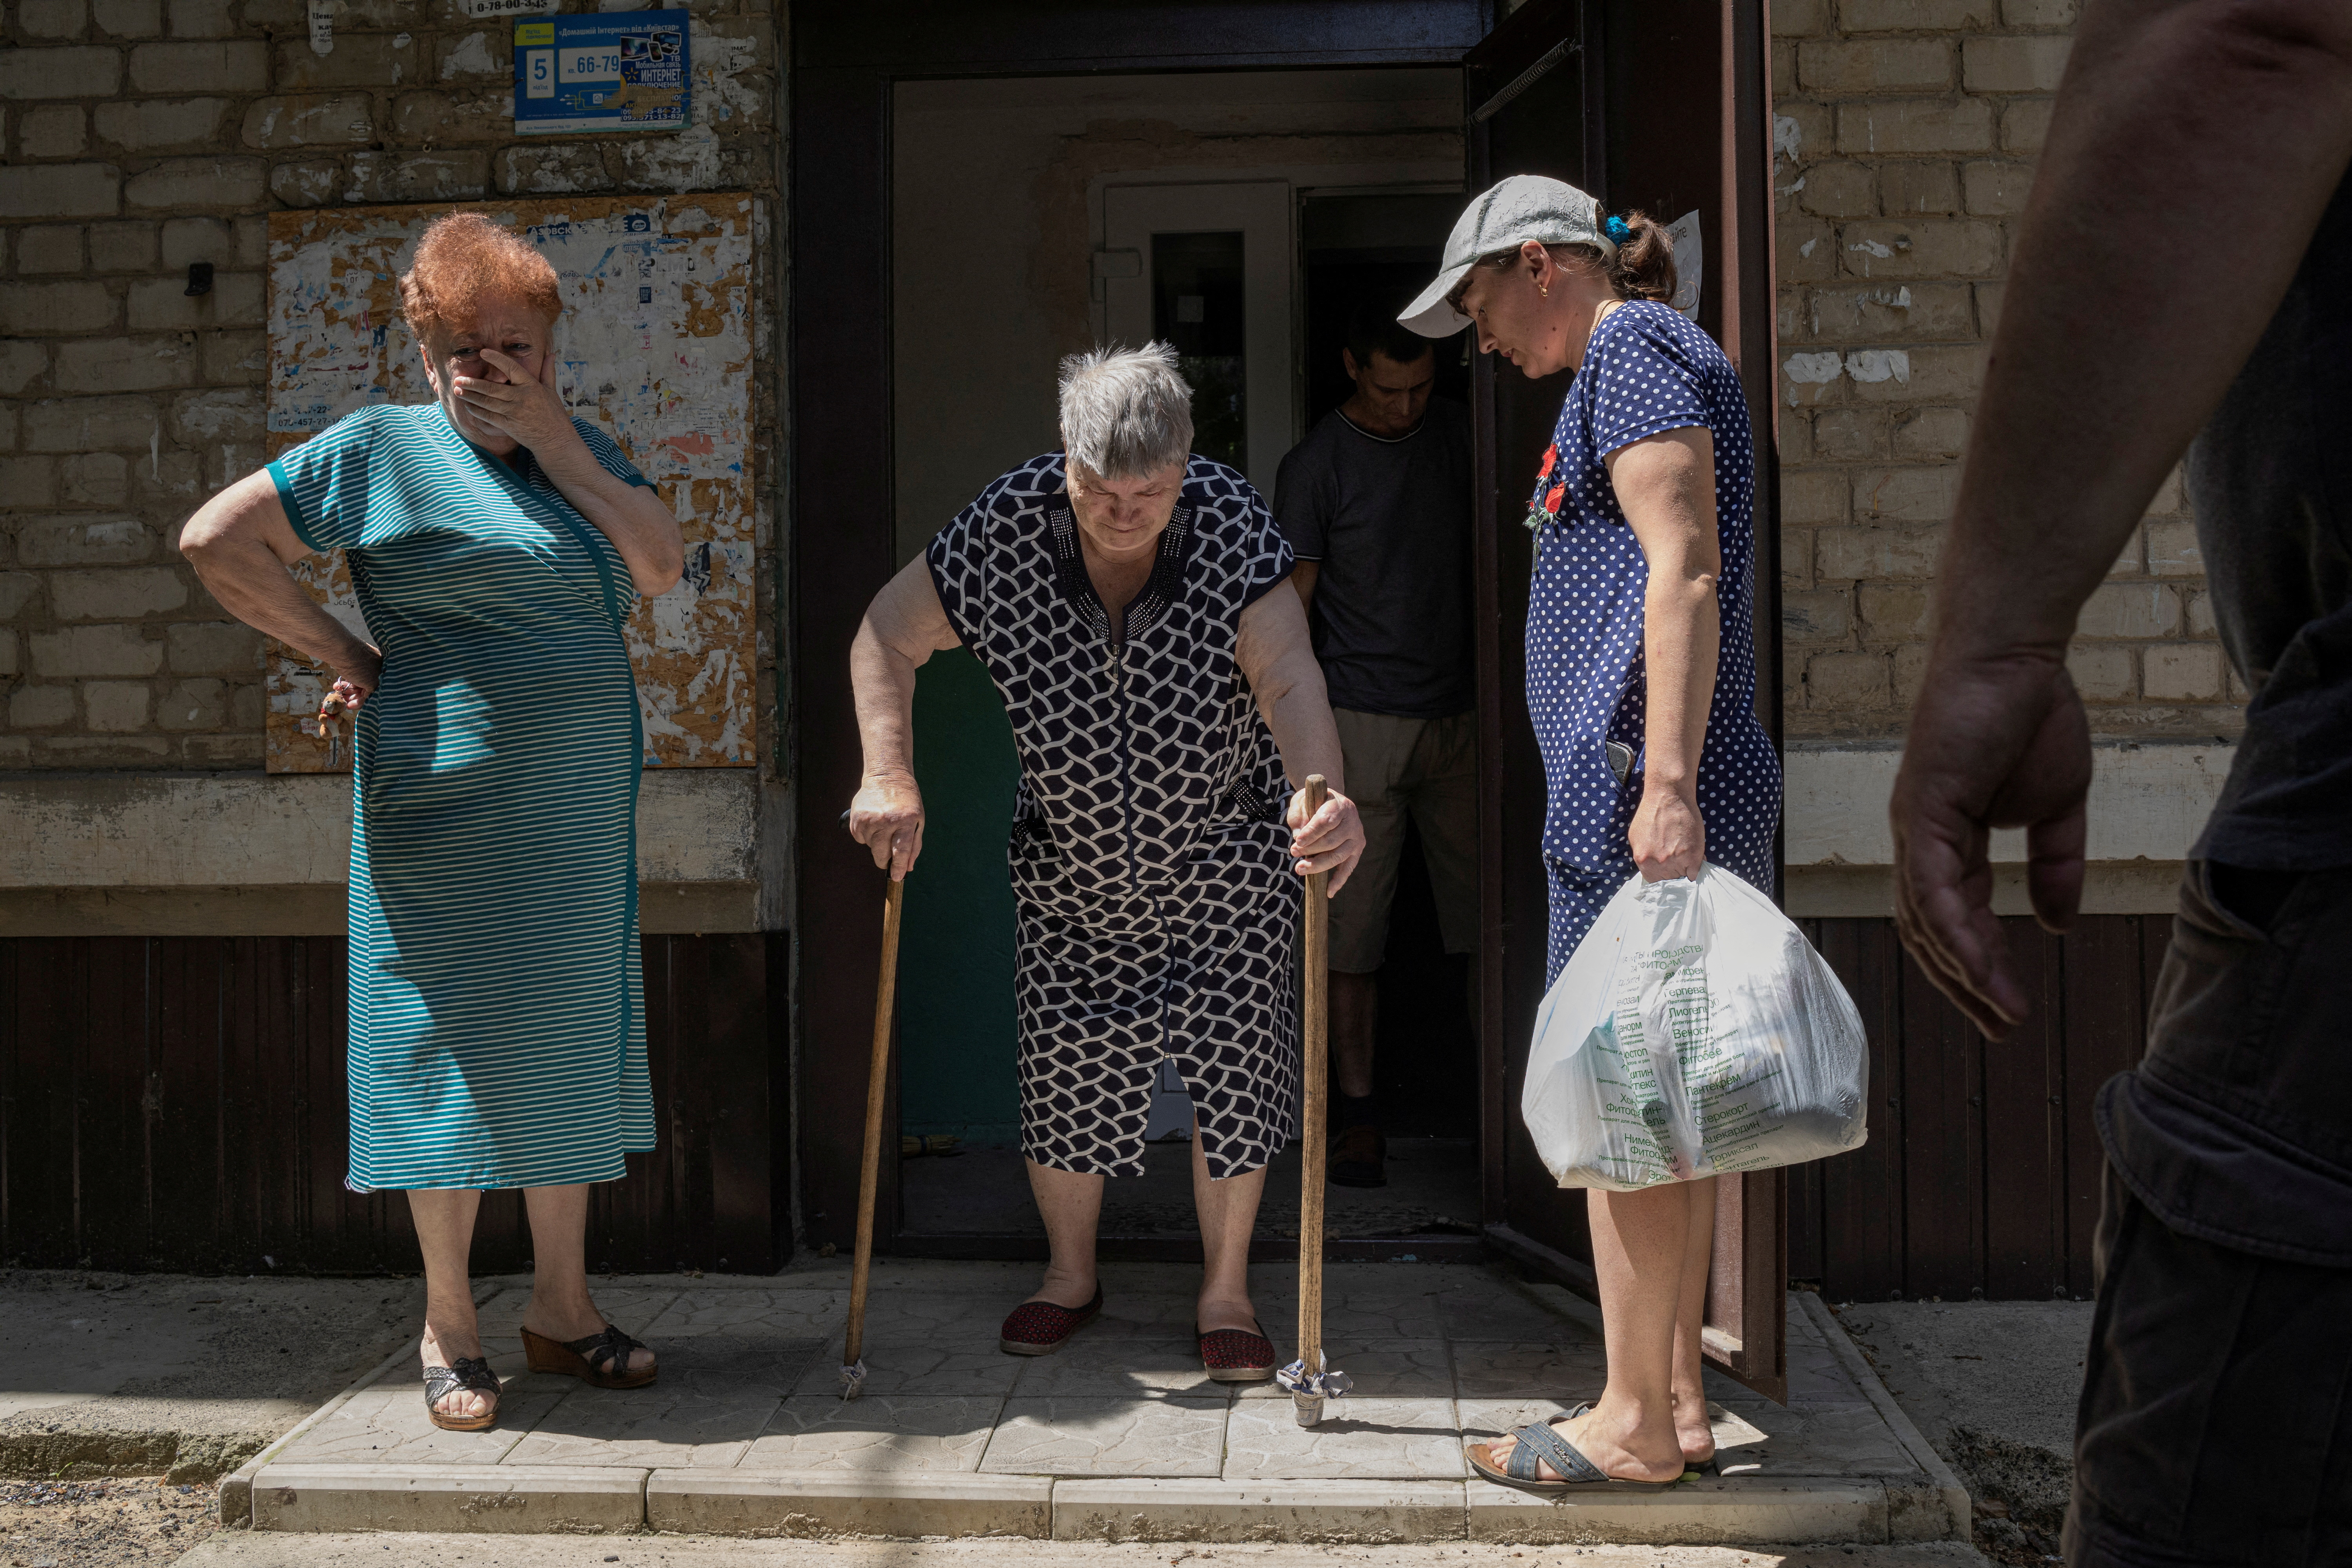 Volunteers from the organisation Vostok SOS bring humanitarian aid and help evacuate civilians from war-affected areas of eastern Ukraine